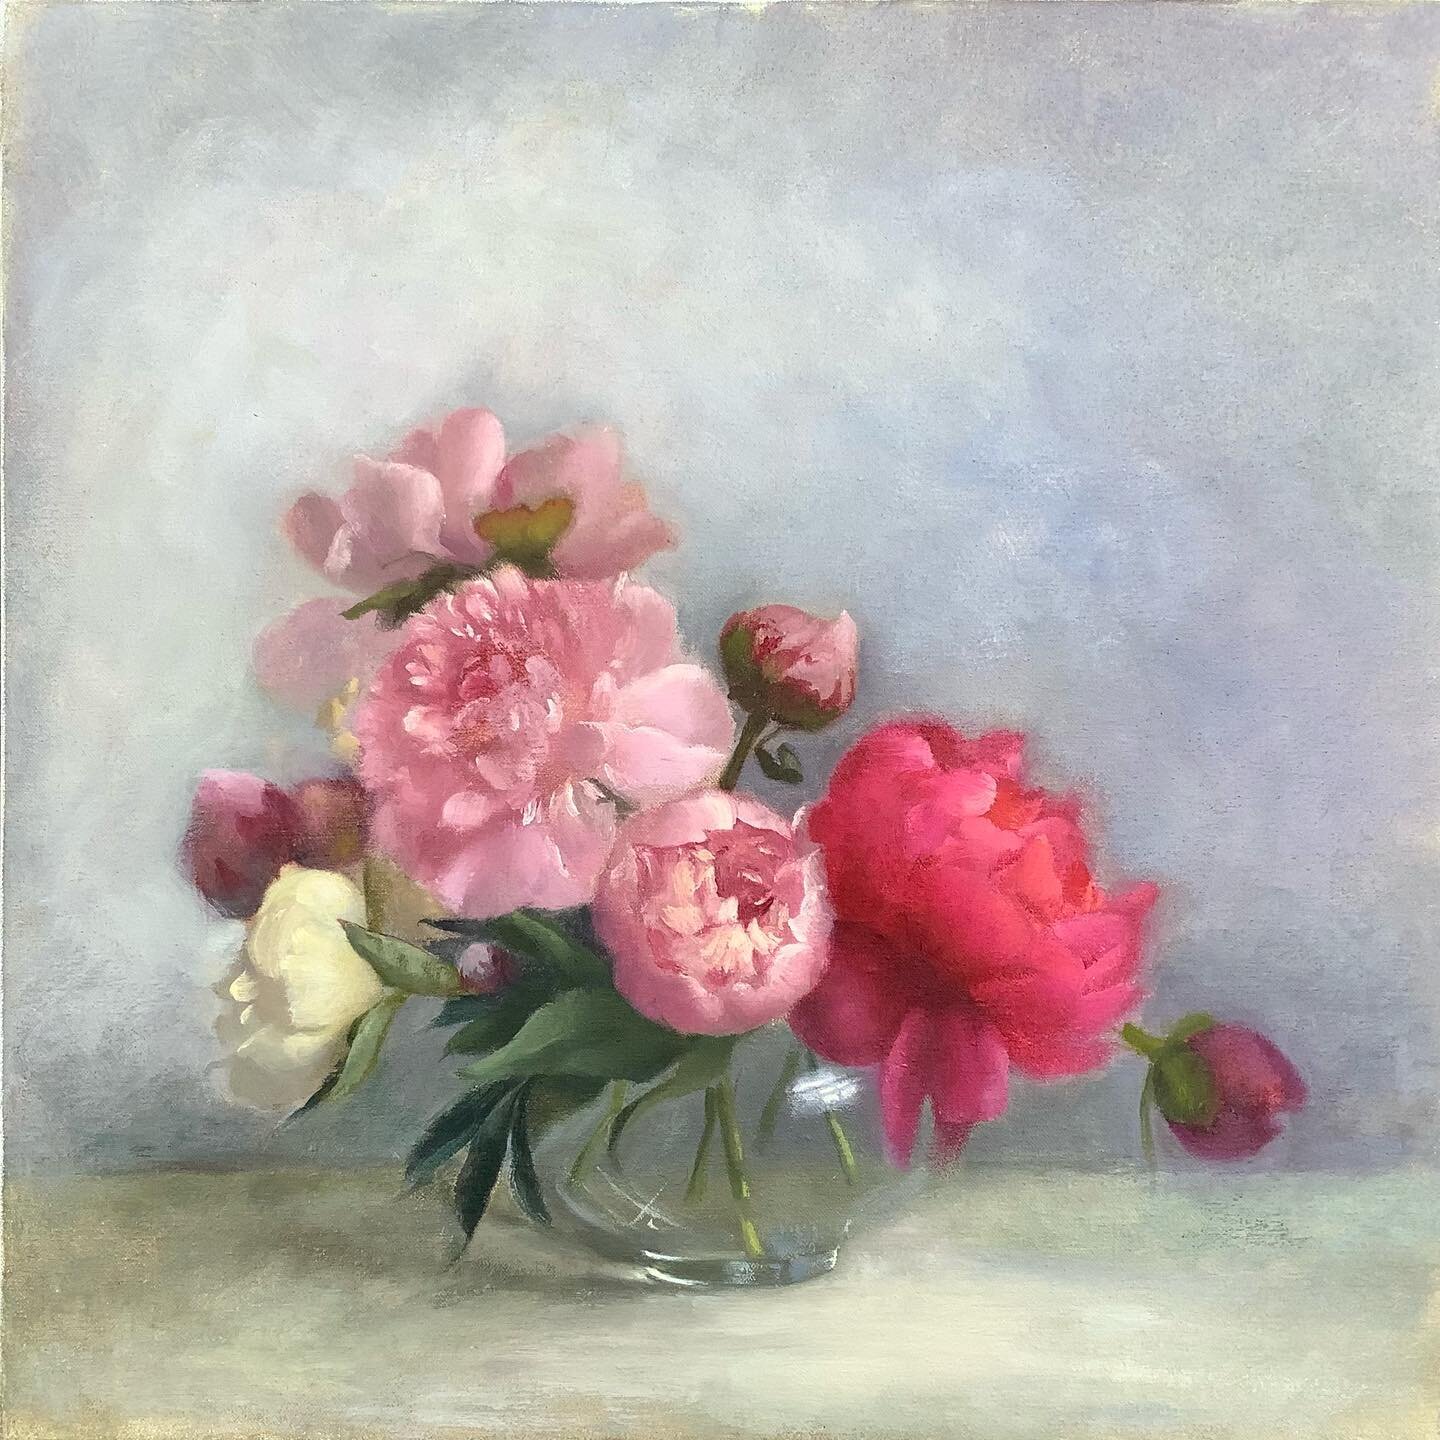 Peonies in a glass bowl painted with Annam at #londonfineartstudios #peonypainting #flowerpainting